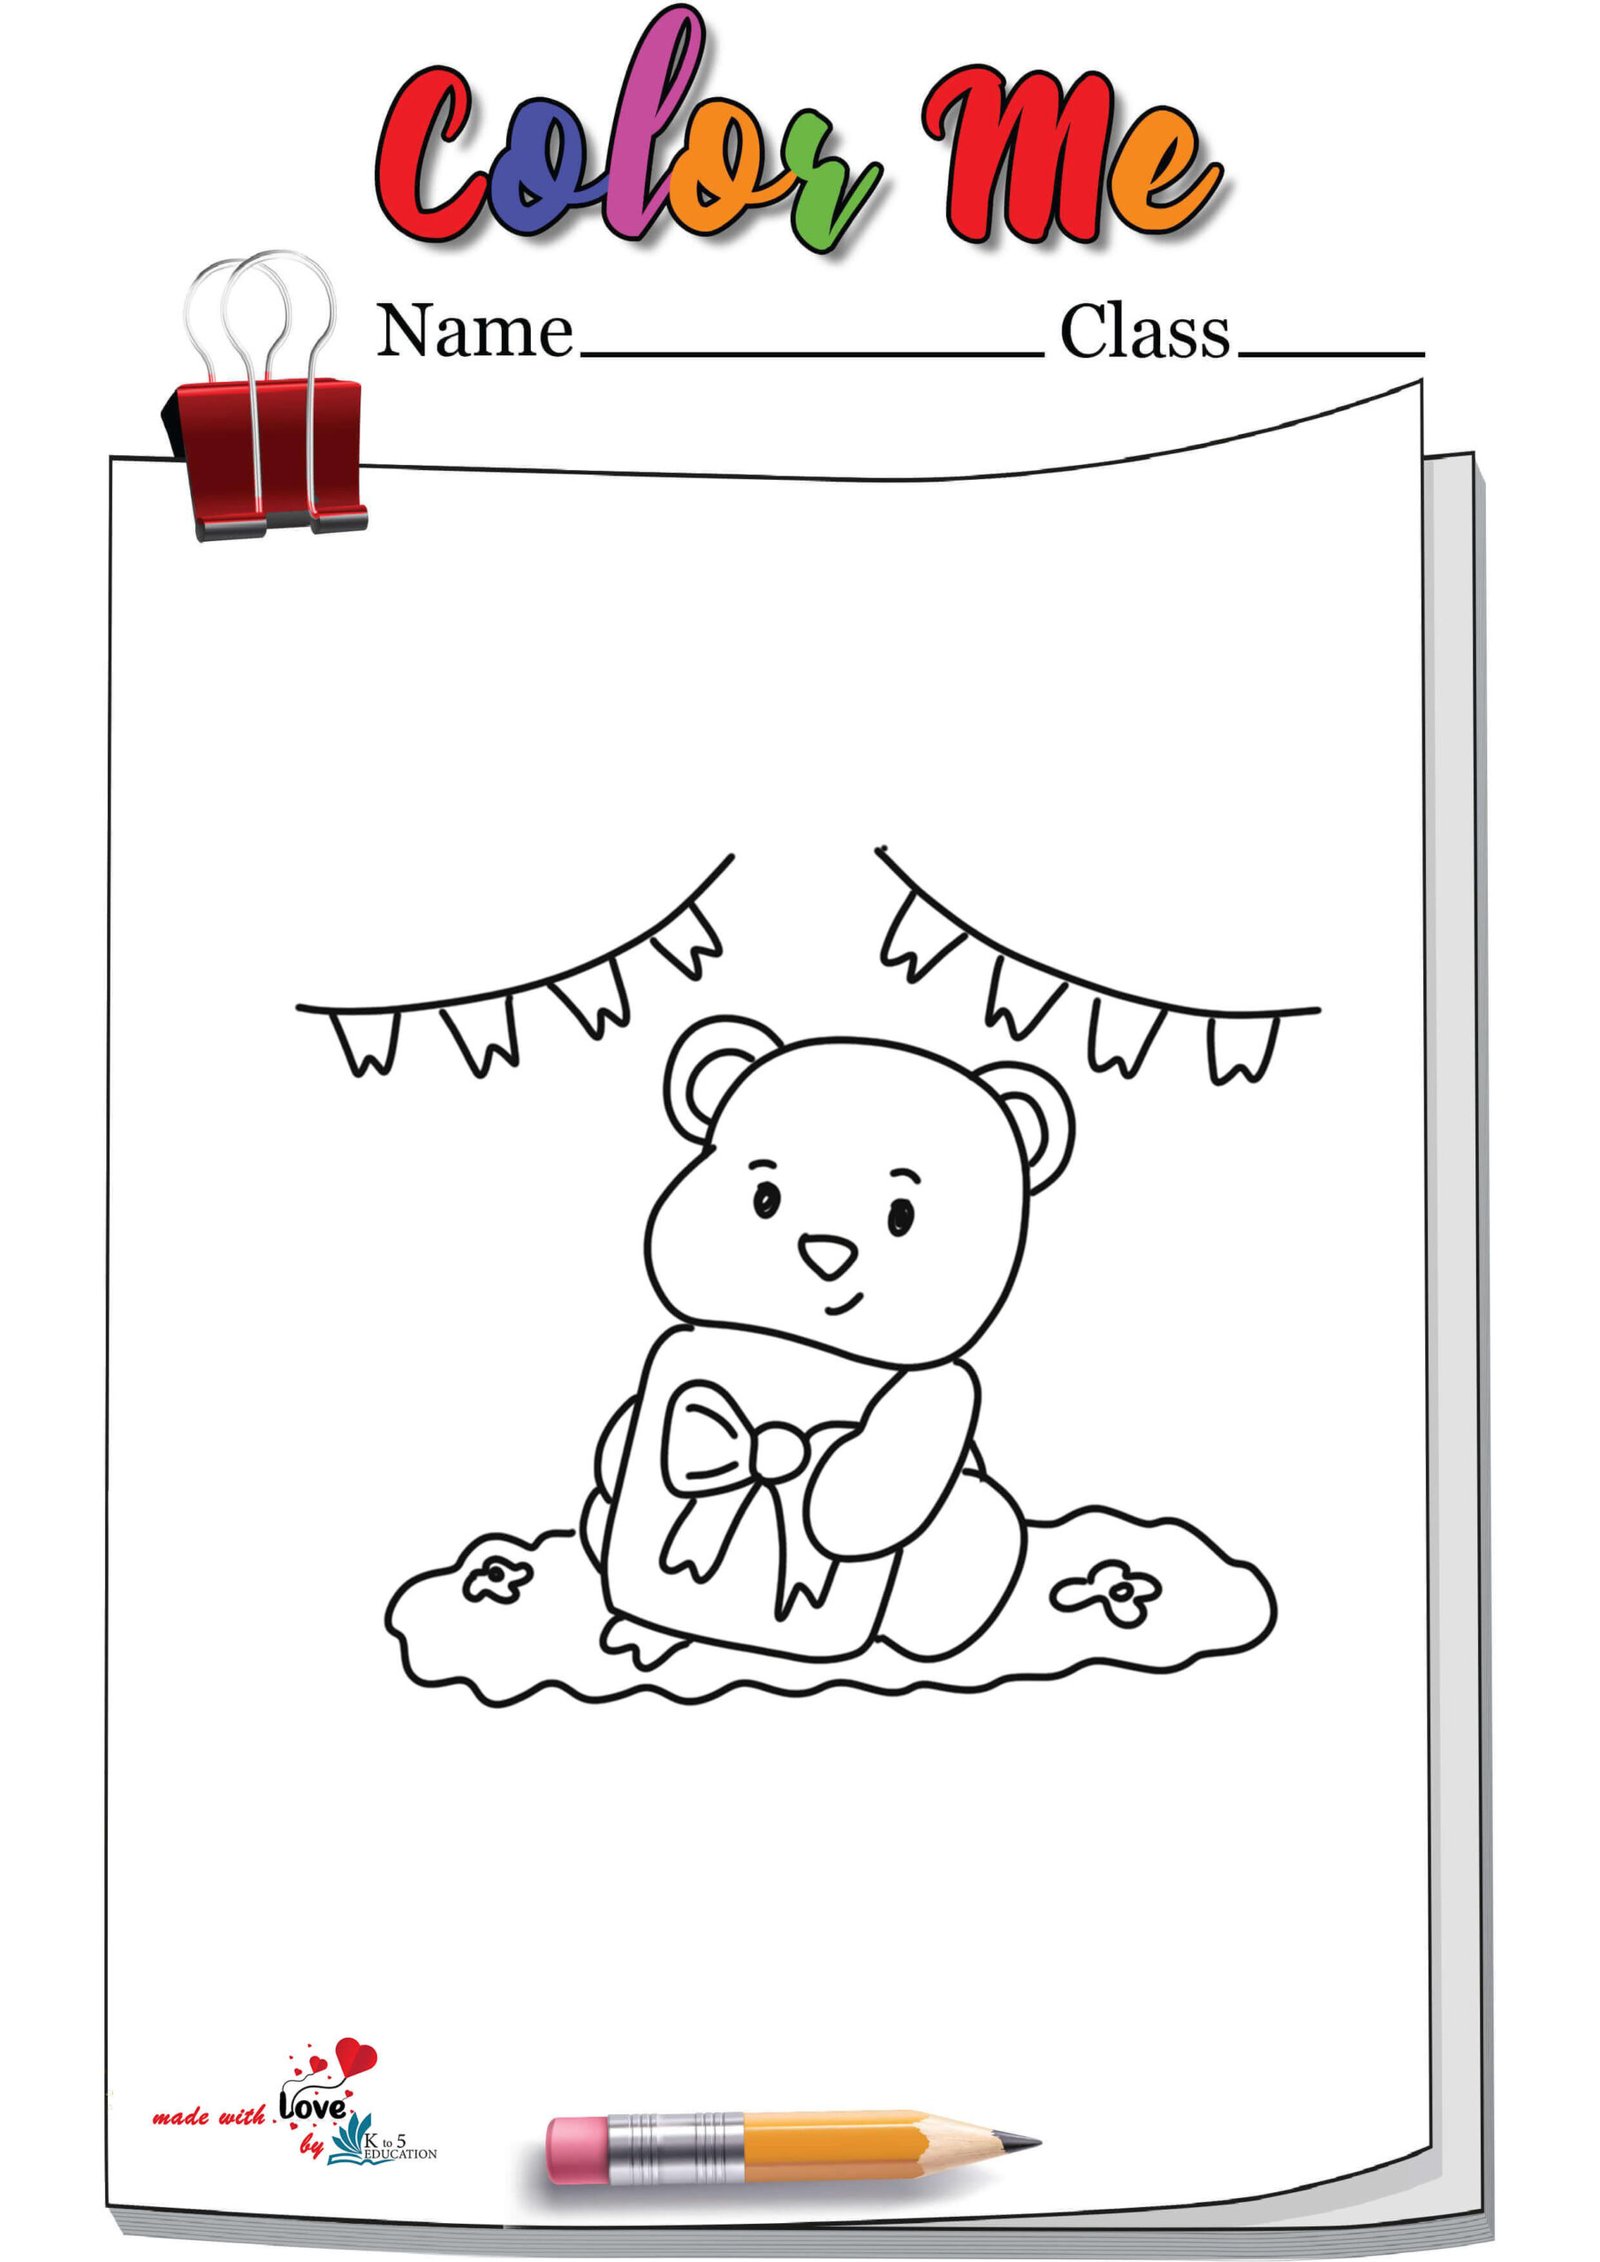 Cute Teddy Bear Sitting Coloring Page